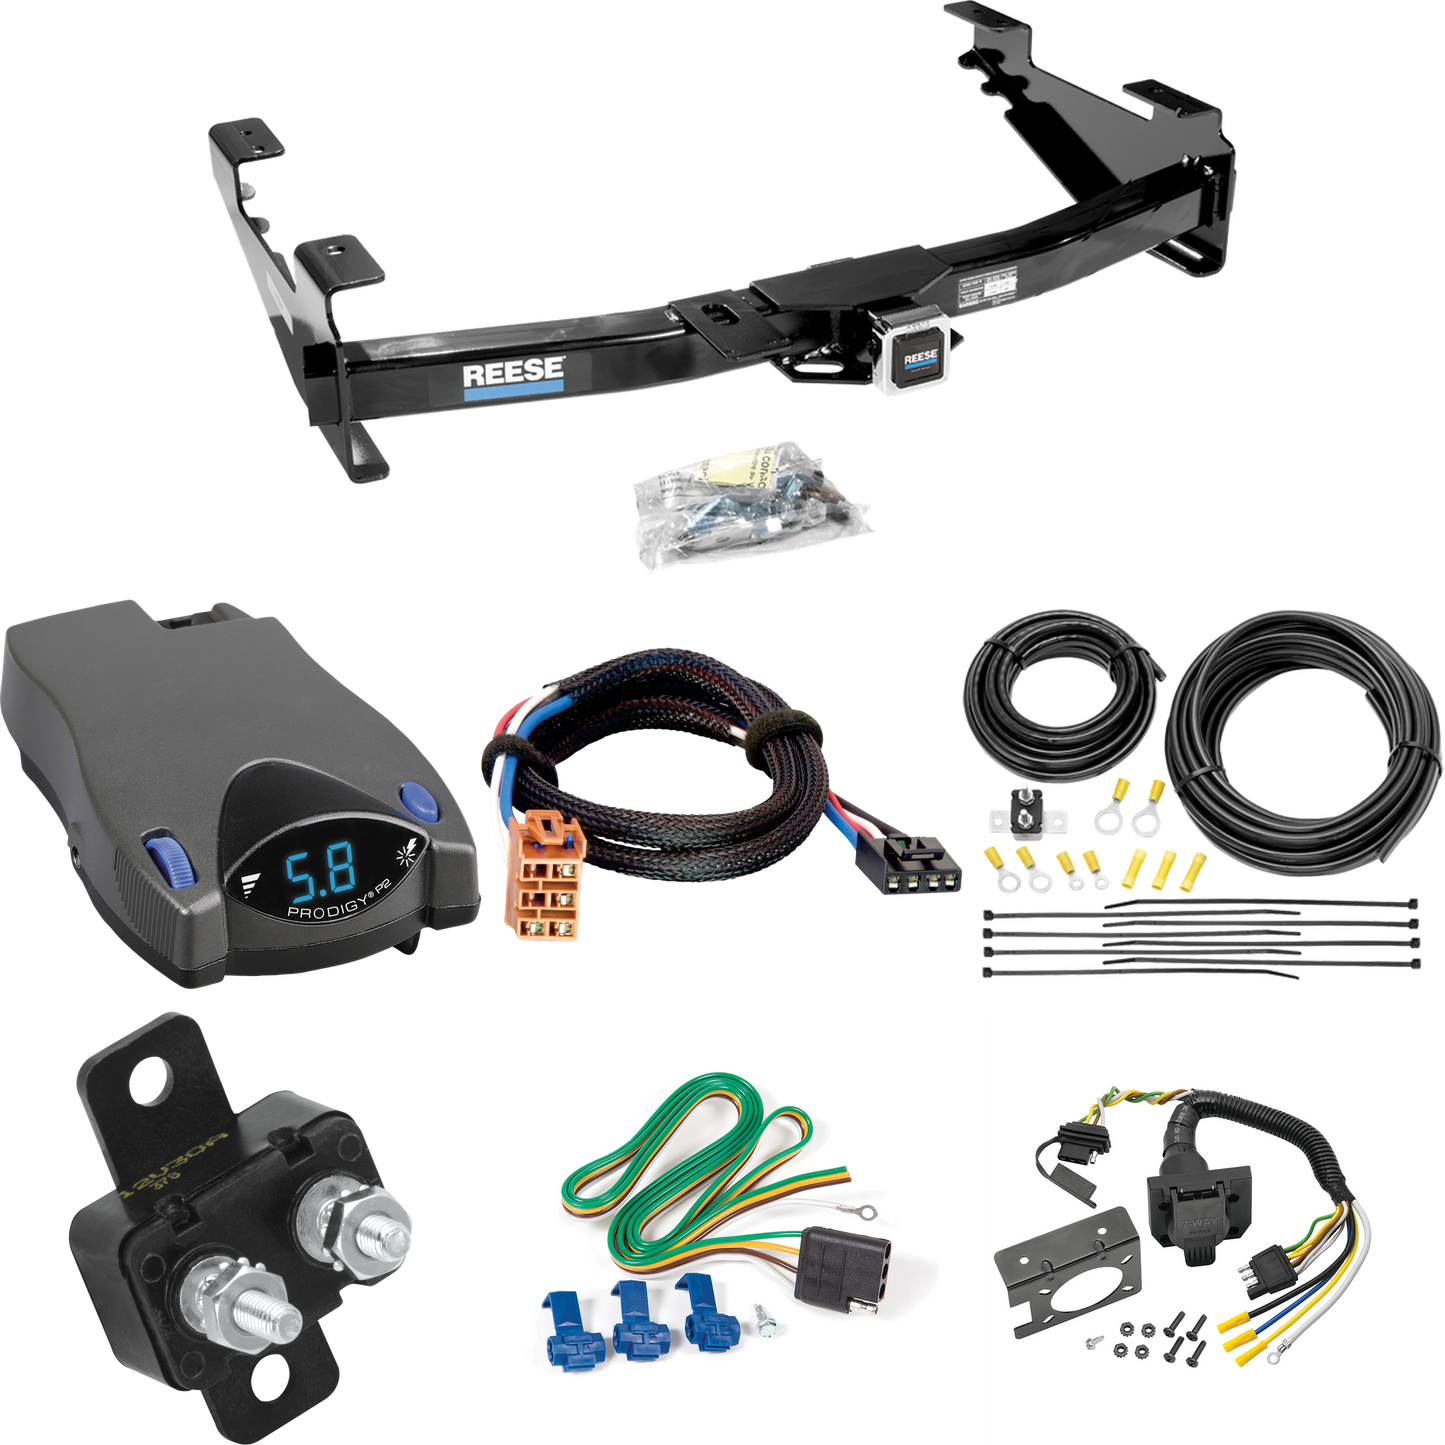 Fits 2003-2007 GMC Sierra 3500 Trailer Hitch Tow PKG w/ Tekonsha Prodigy P2 Brake Control + Plug & Play BC Adapter + 7-Way RV Wiring (For (Classic) Models) By Reese Towpower